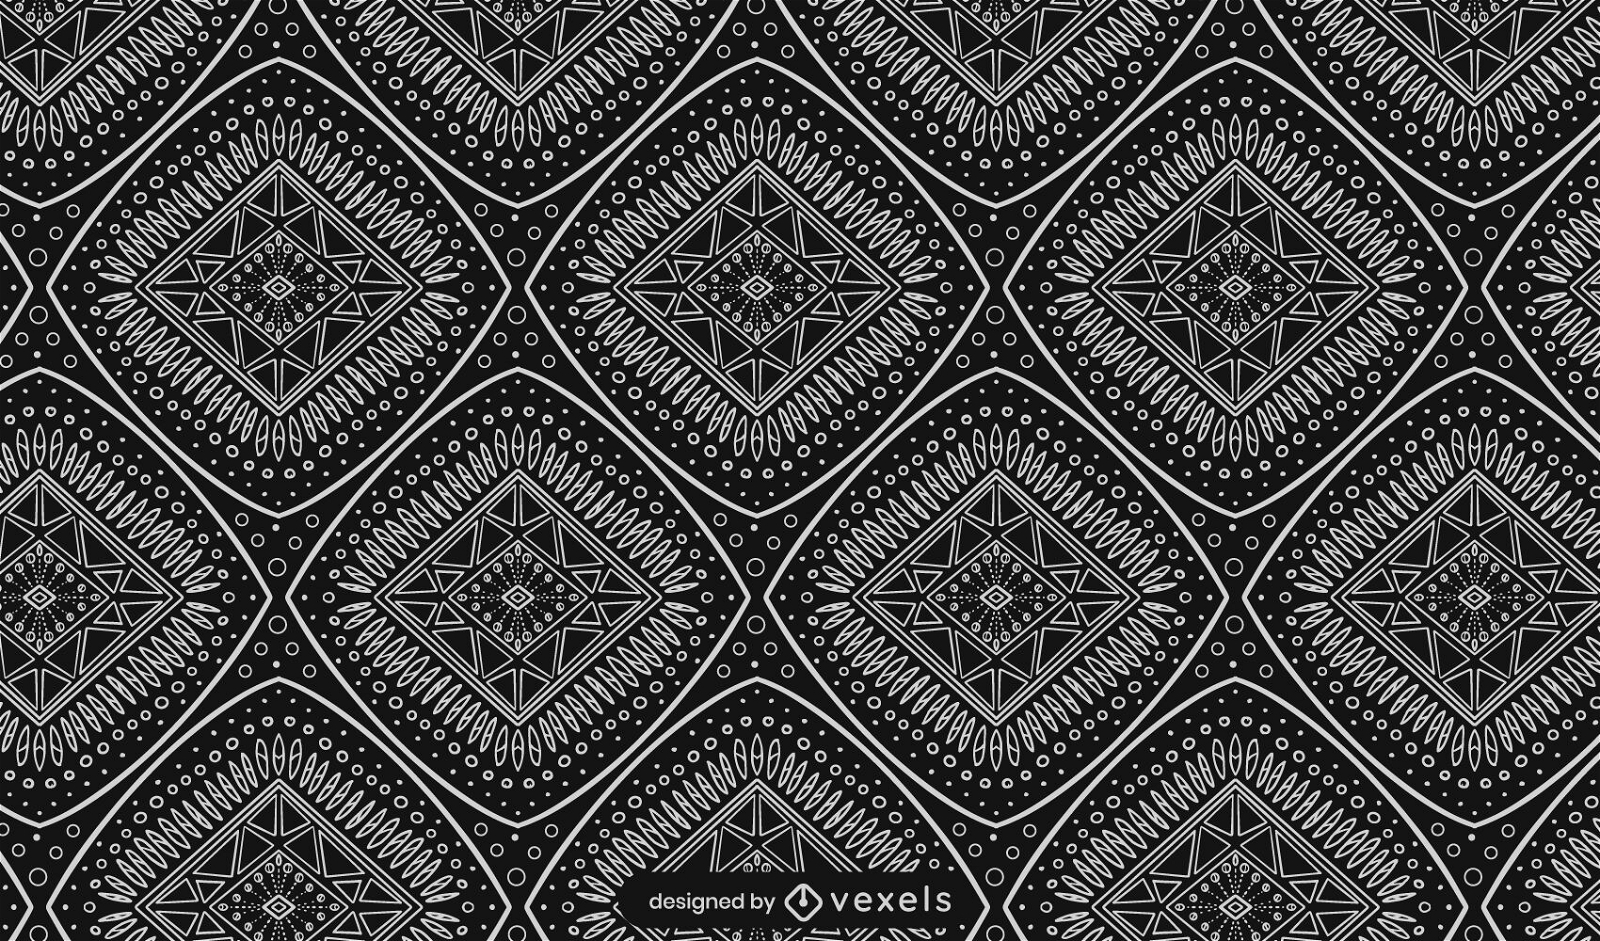 African black and white stroke pattern design